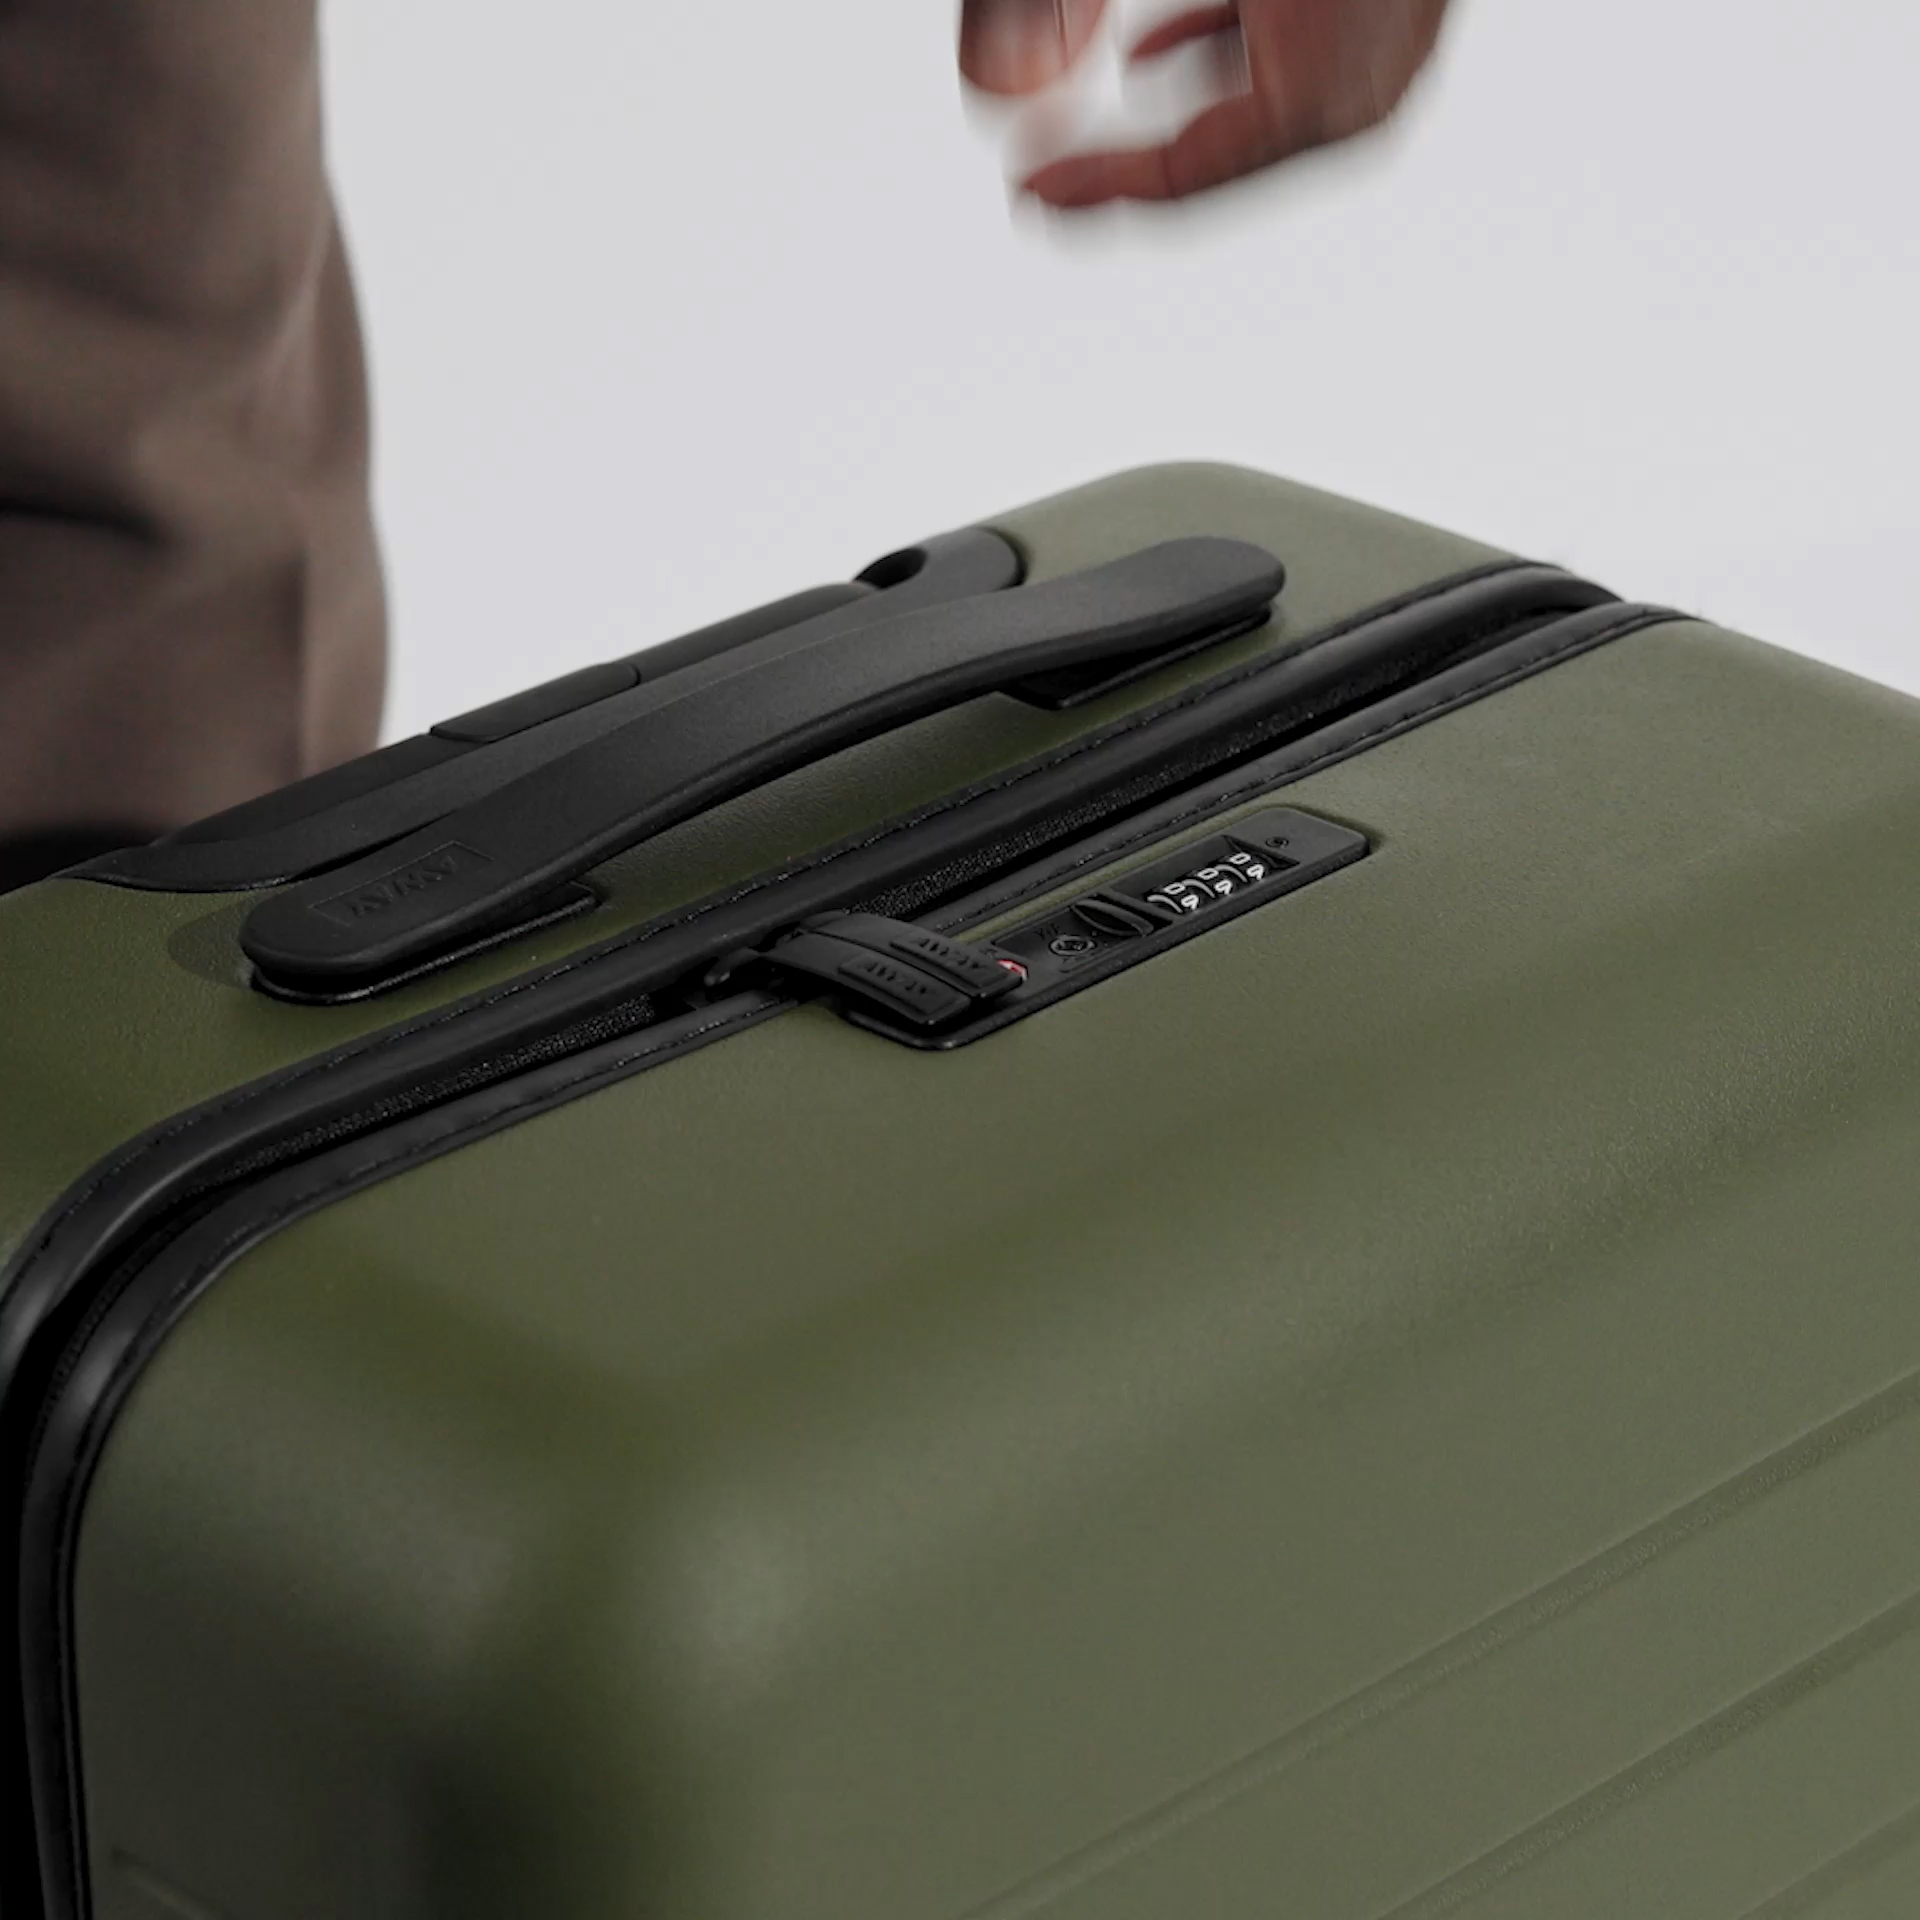 Shop The Daily Carry-On  Away: Built for modern travel